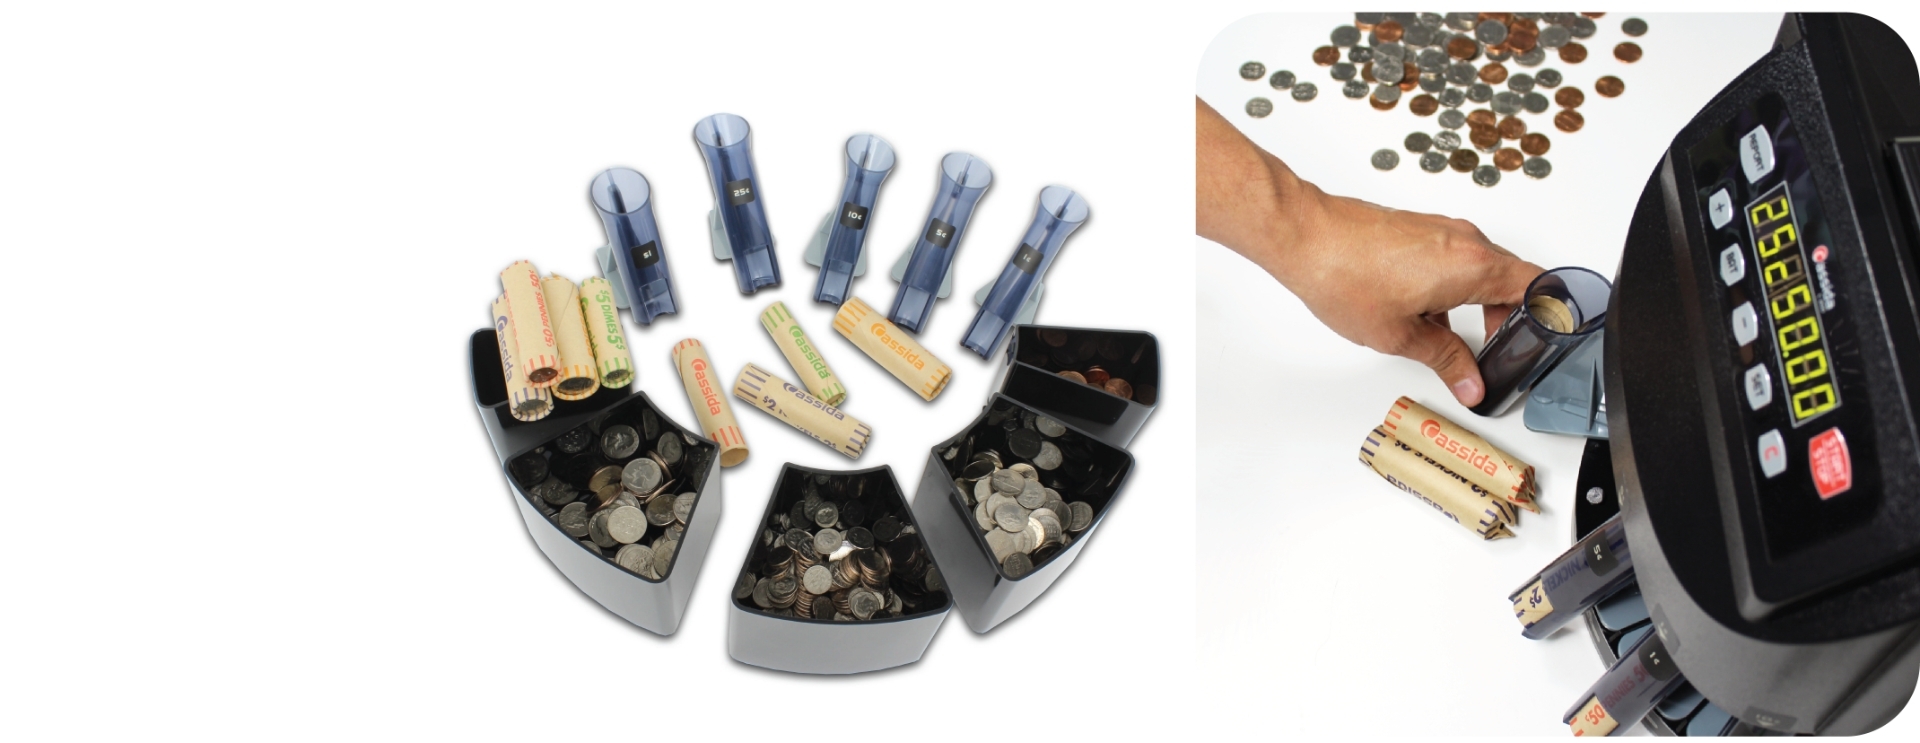 Quickly and Efficiently Sort and Roll Coins with Ease